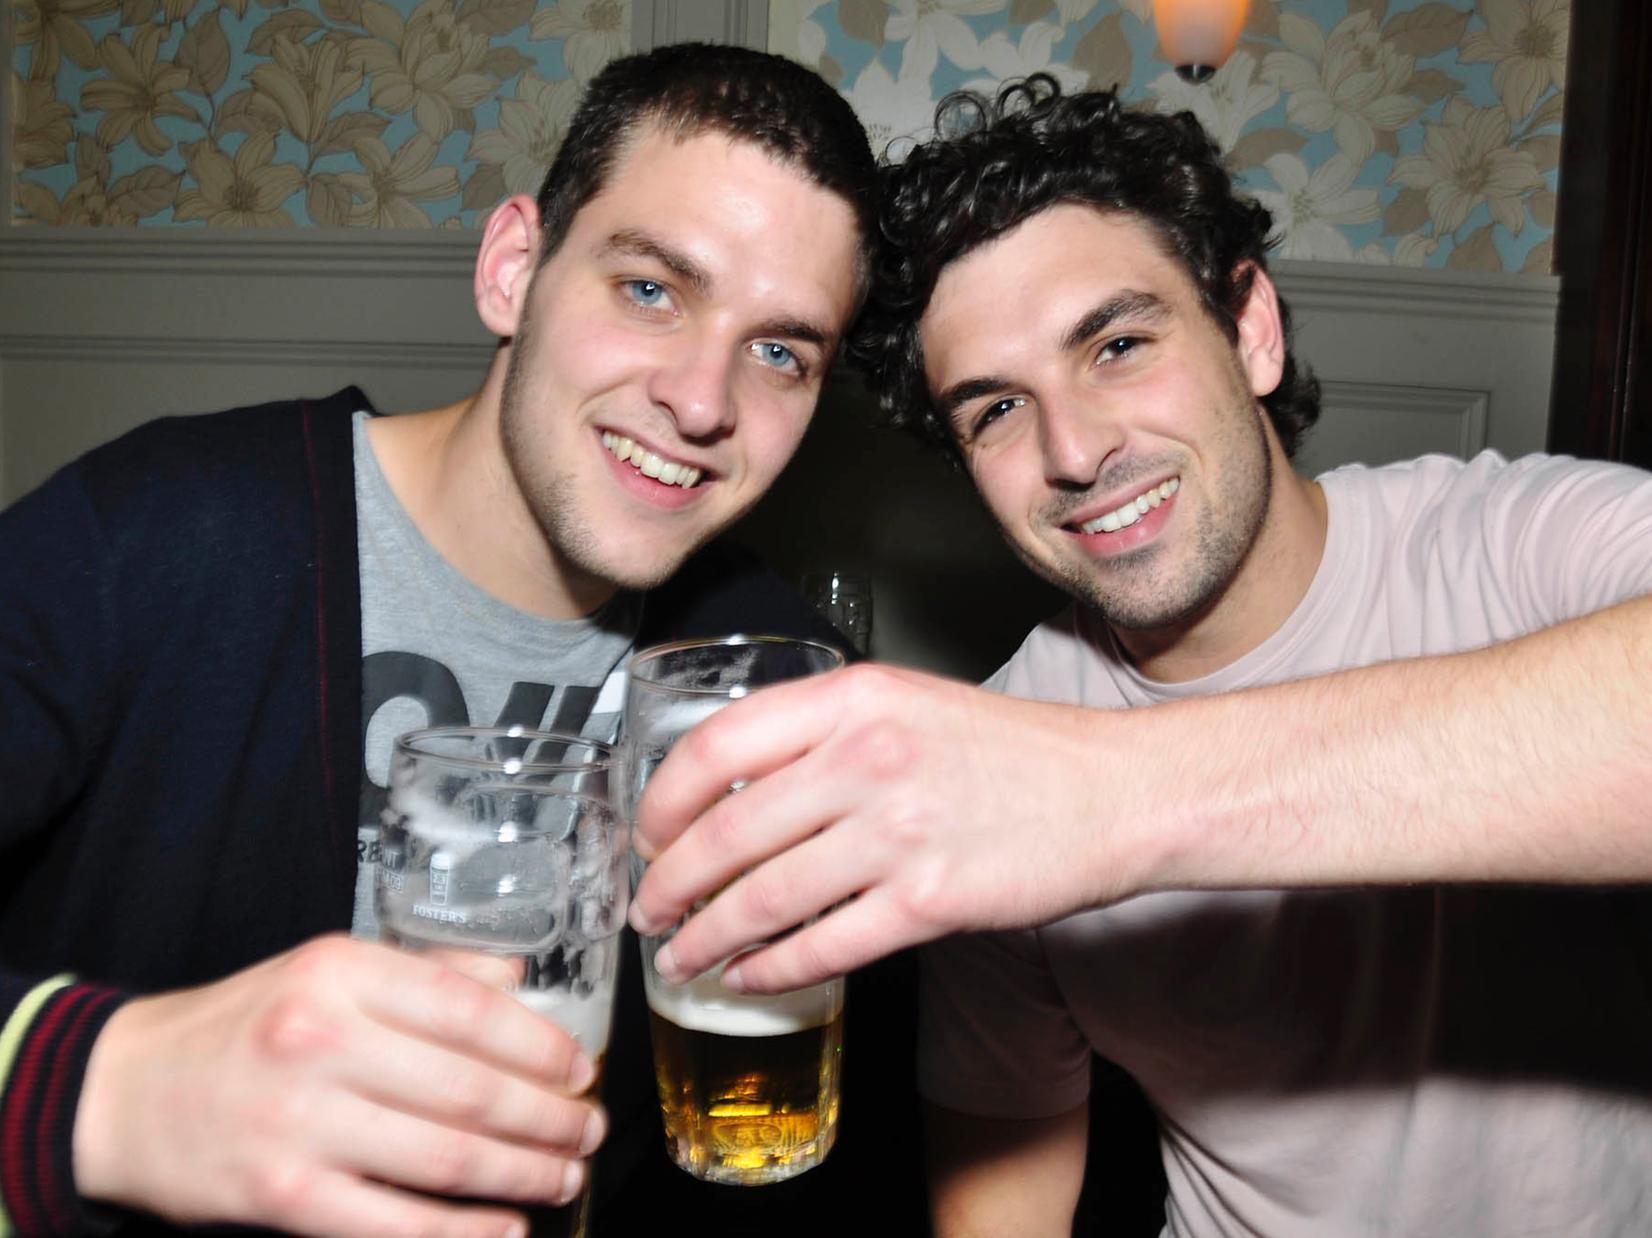 James and Nick toast their night away in Bar 2b.